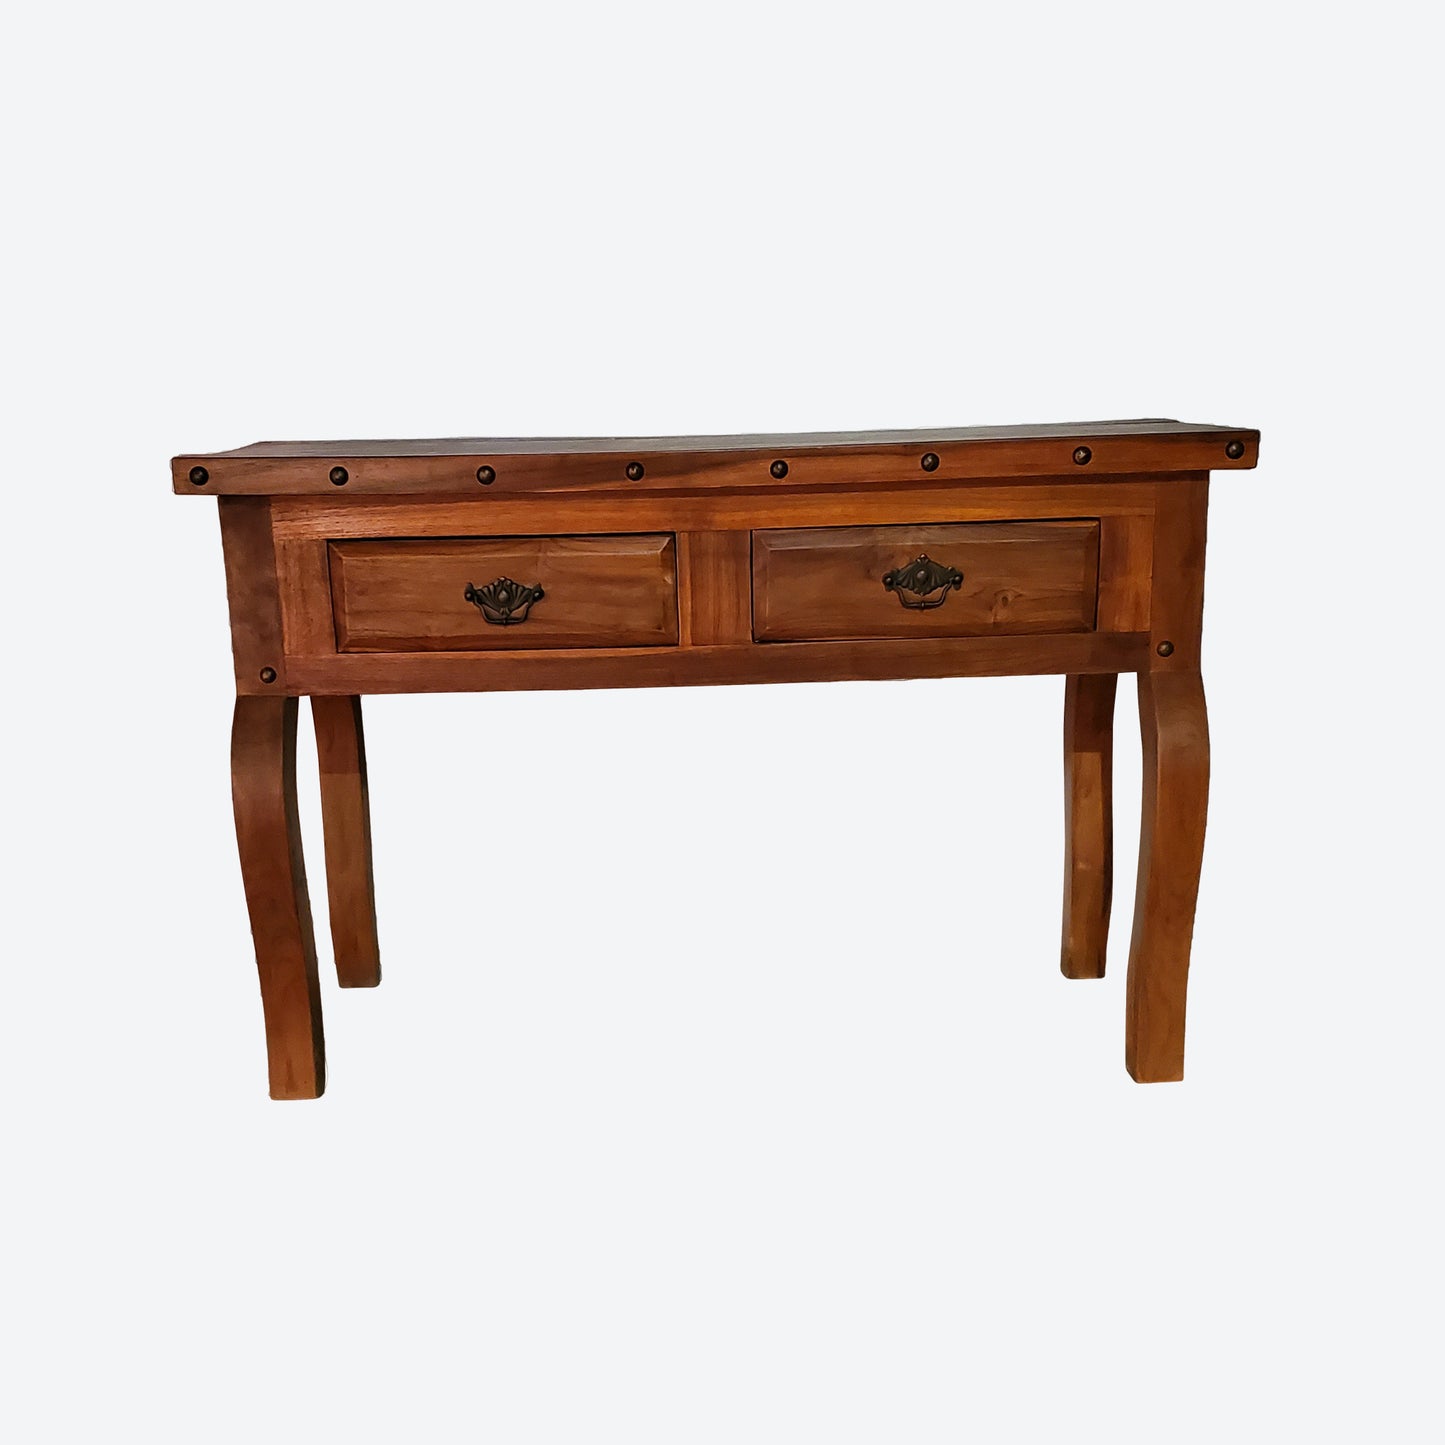 Teak Center Console Table With Round Studs and Metal Handles -SK (SKU 1164)